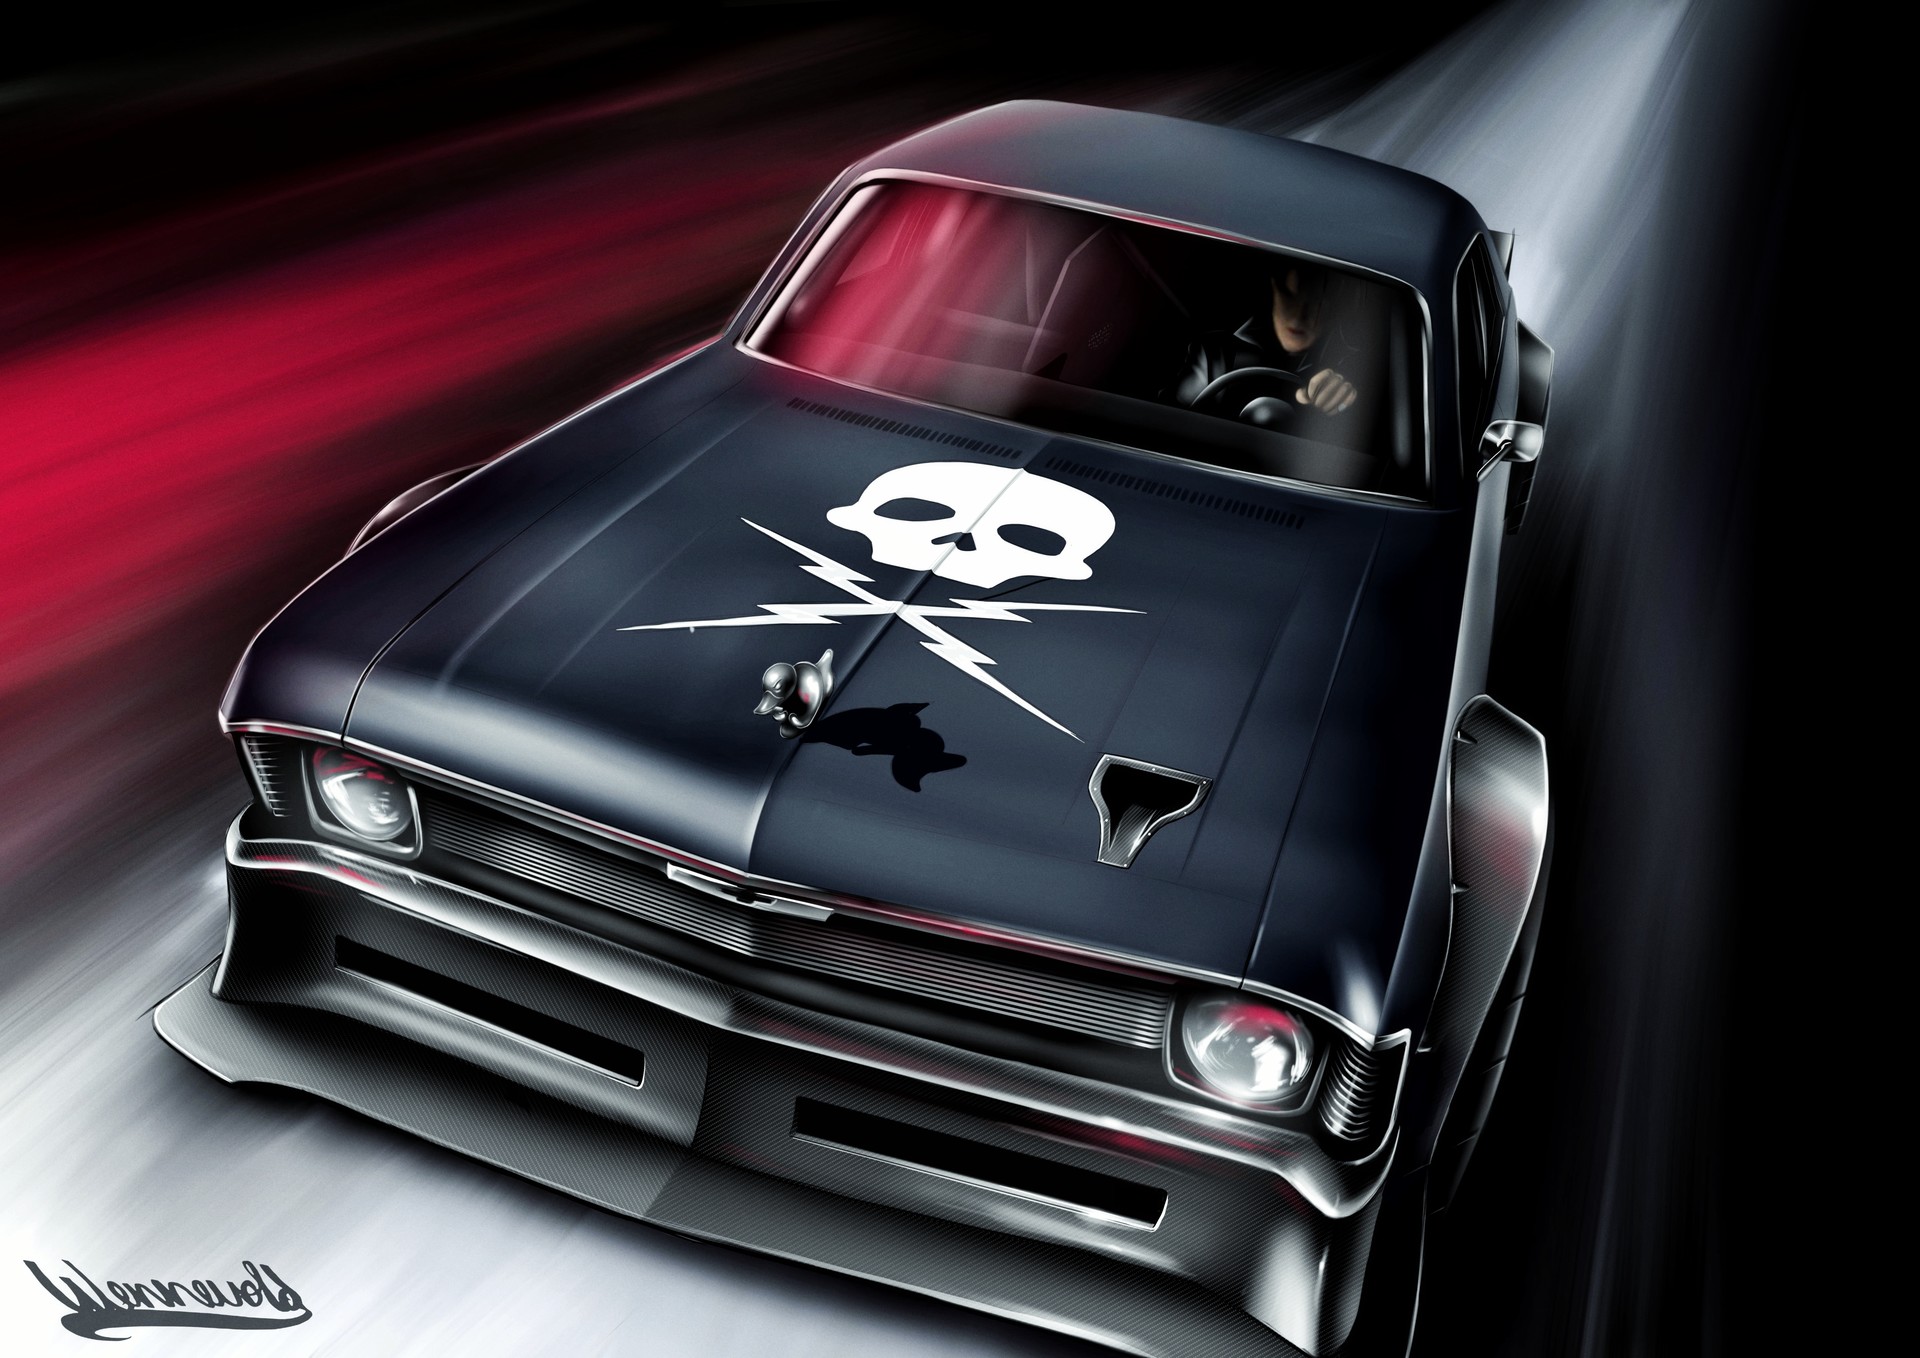 Death Proof Nova Rendering, ANDREAS WENNEVOLD.